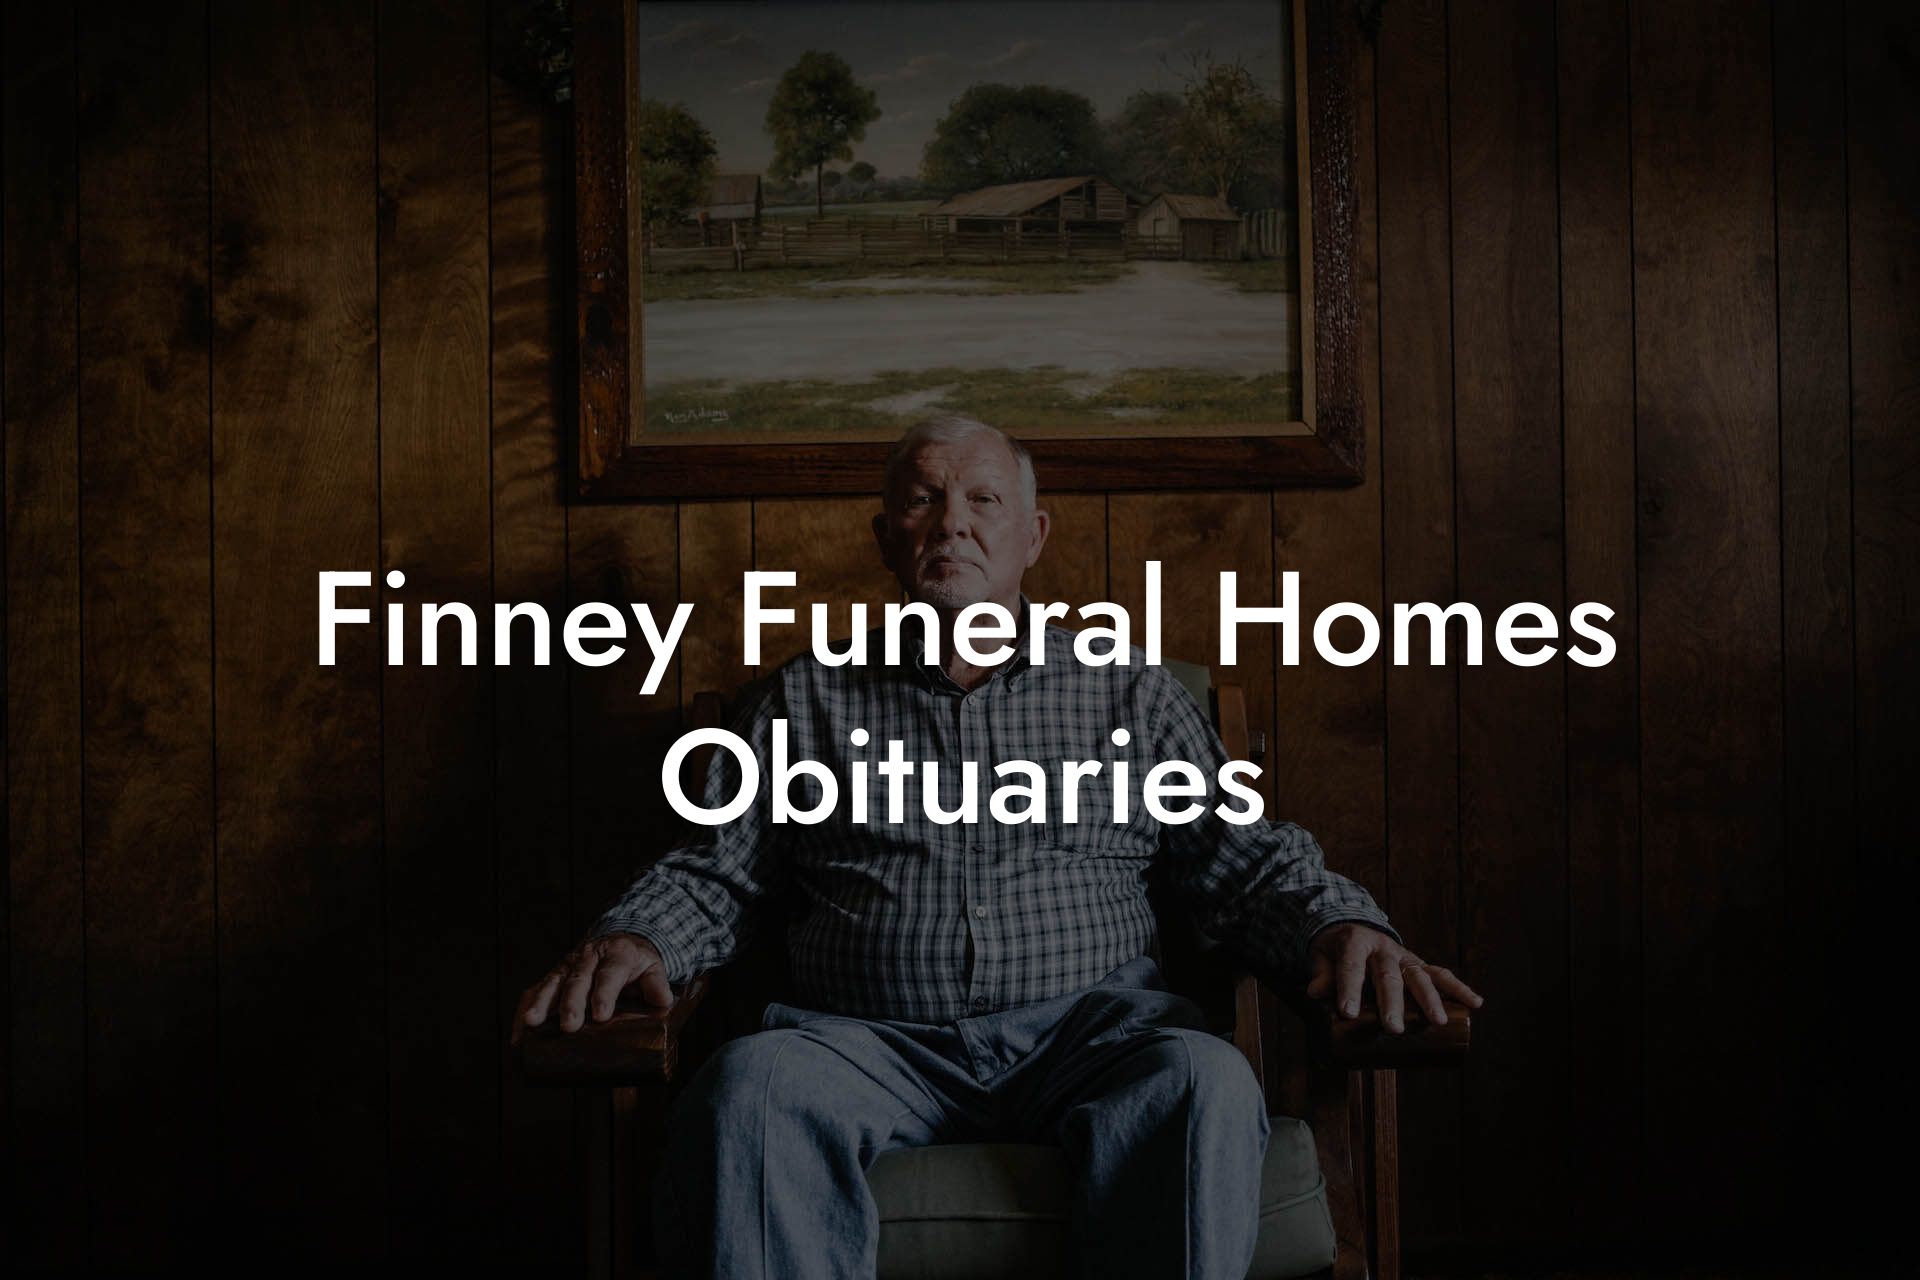 Finney Funeral Homes Obituaries